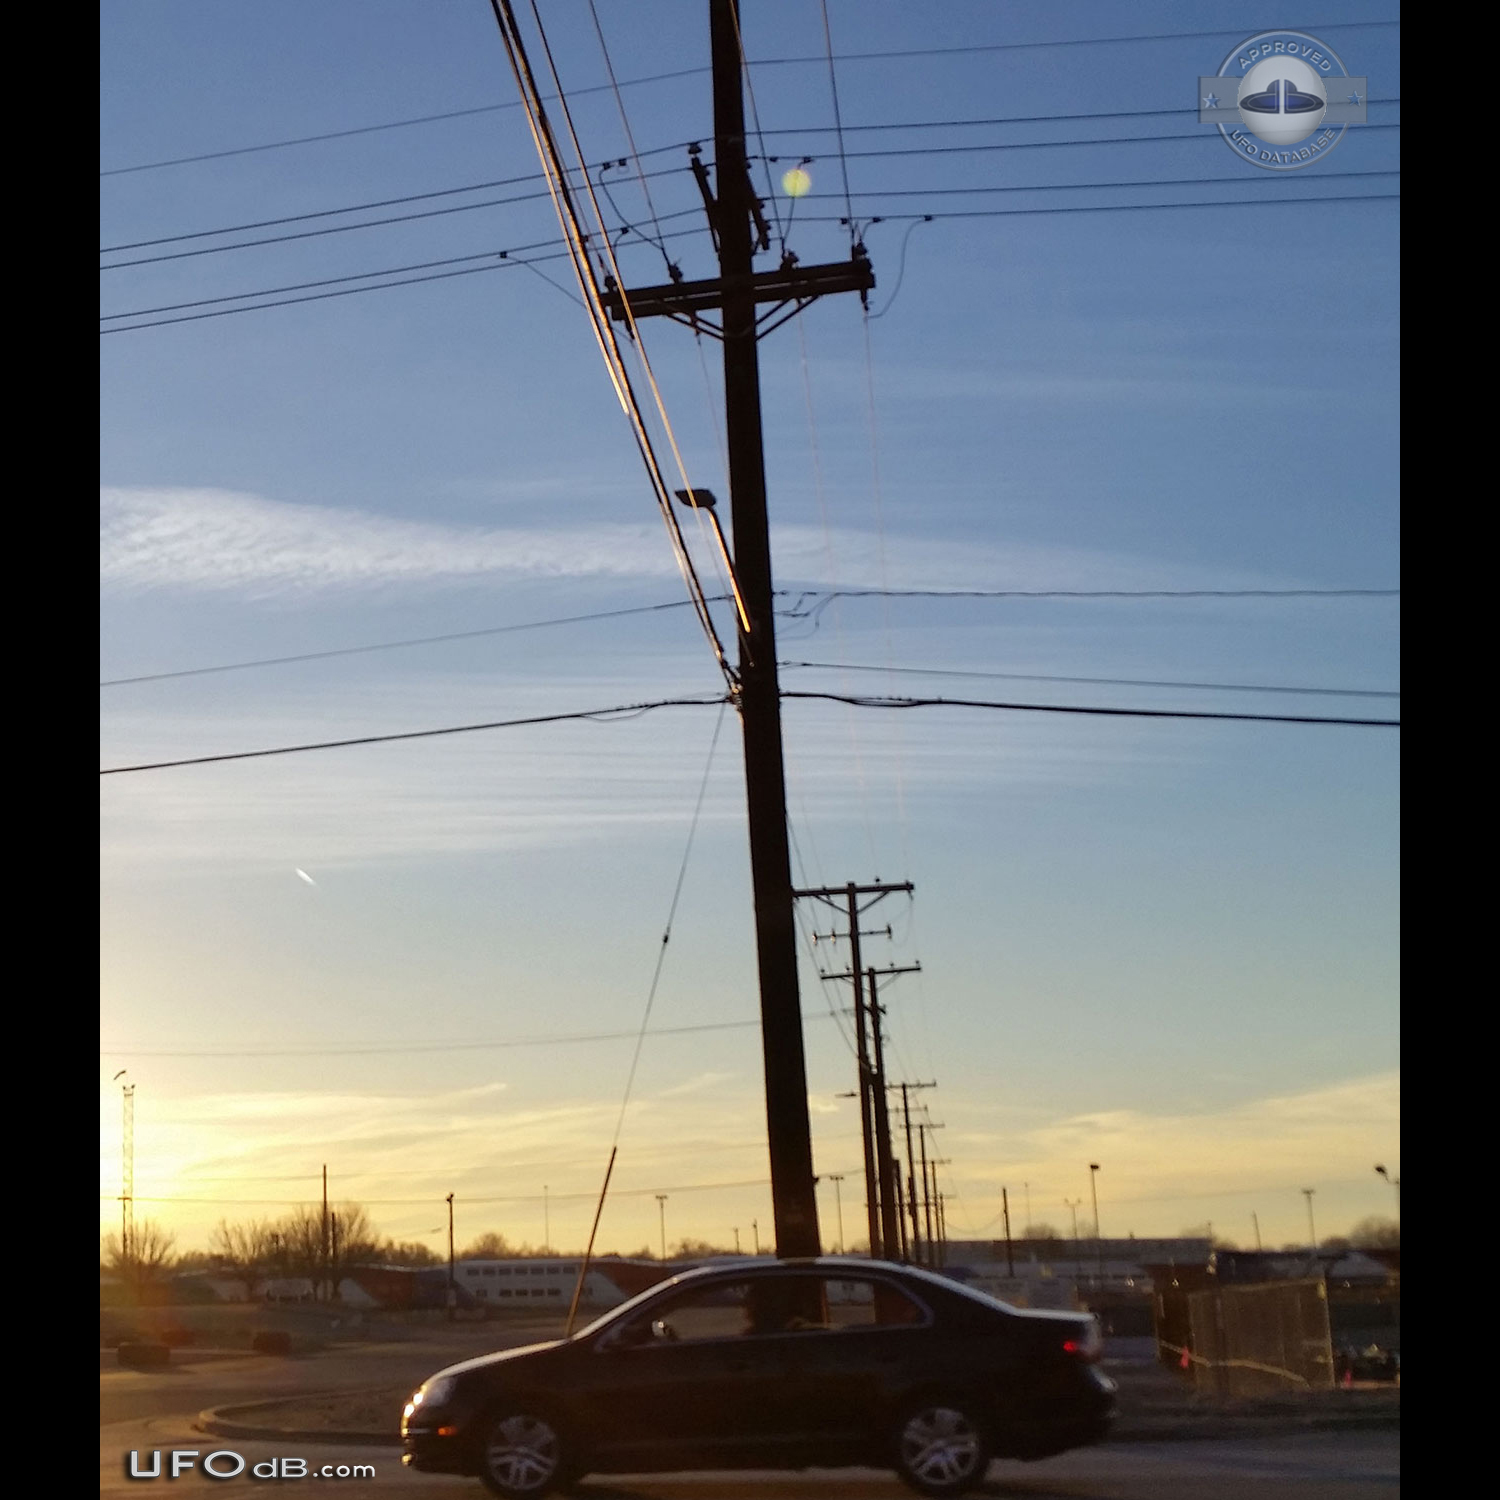 After feeling ET presence Orb UFO seen on Picture Salt Lake City 2015 UFO Picture #638-1